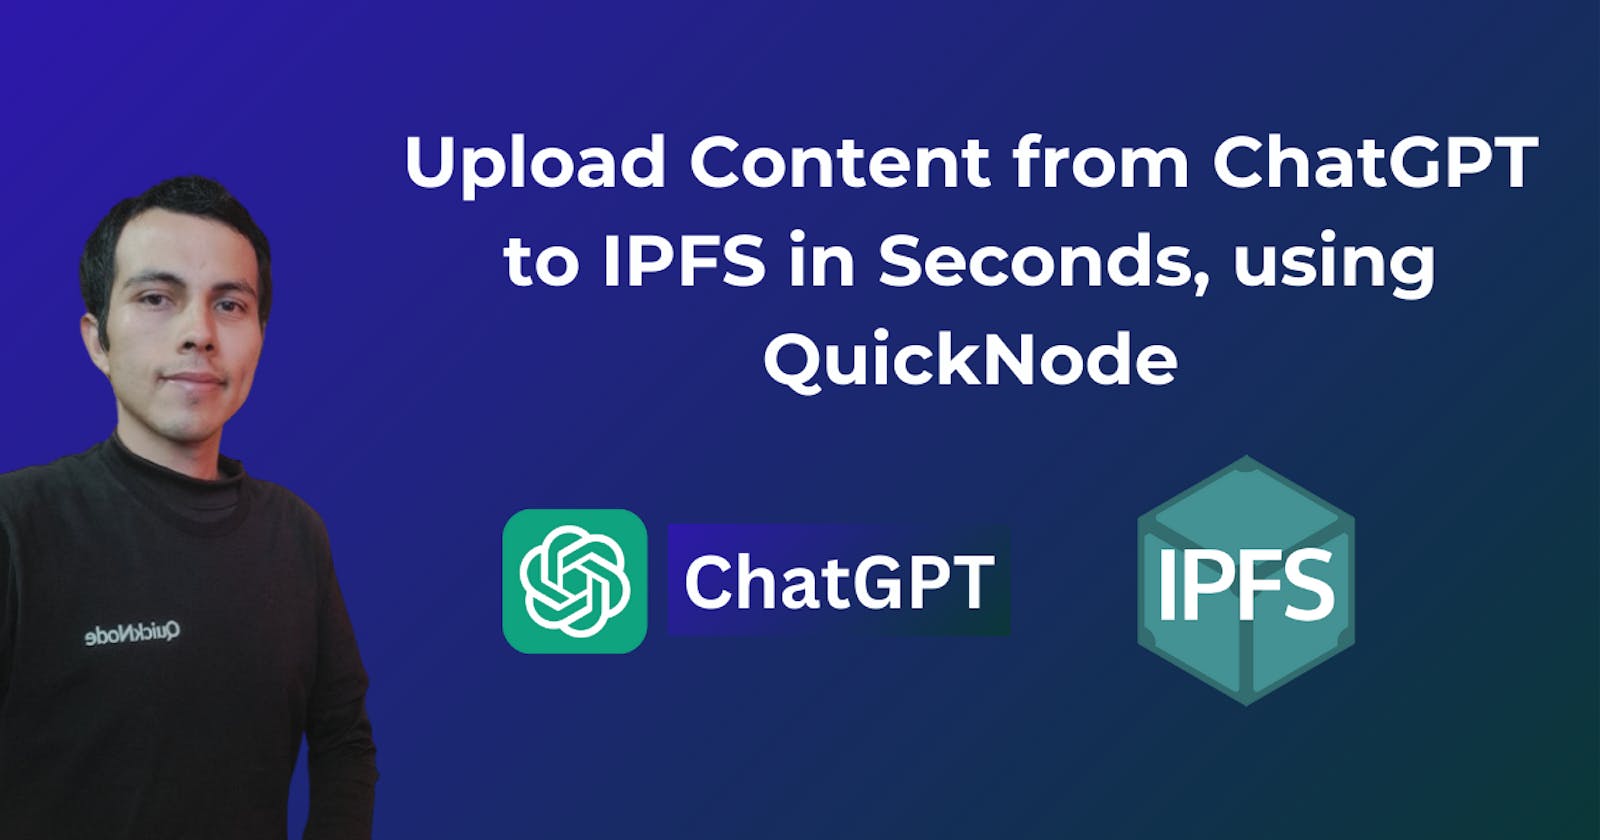 Upload Content from ChatGPT to IPFS in Seconds, using QuickNode